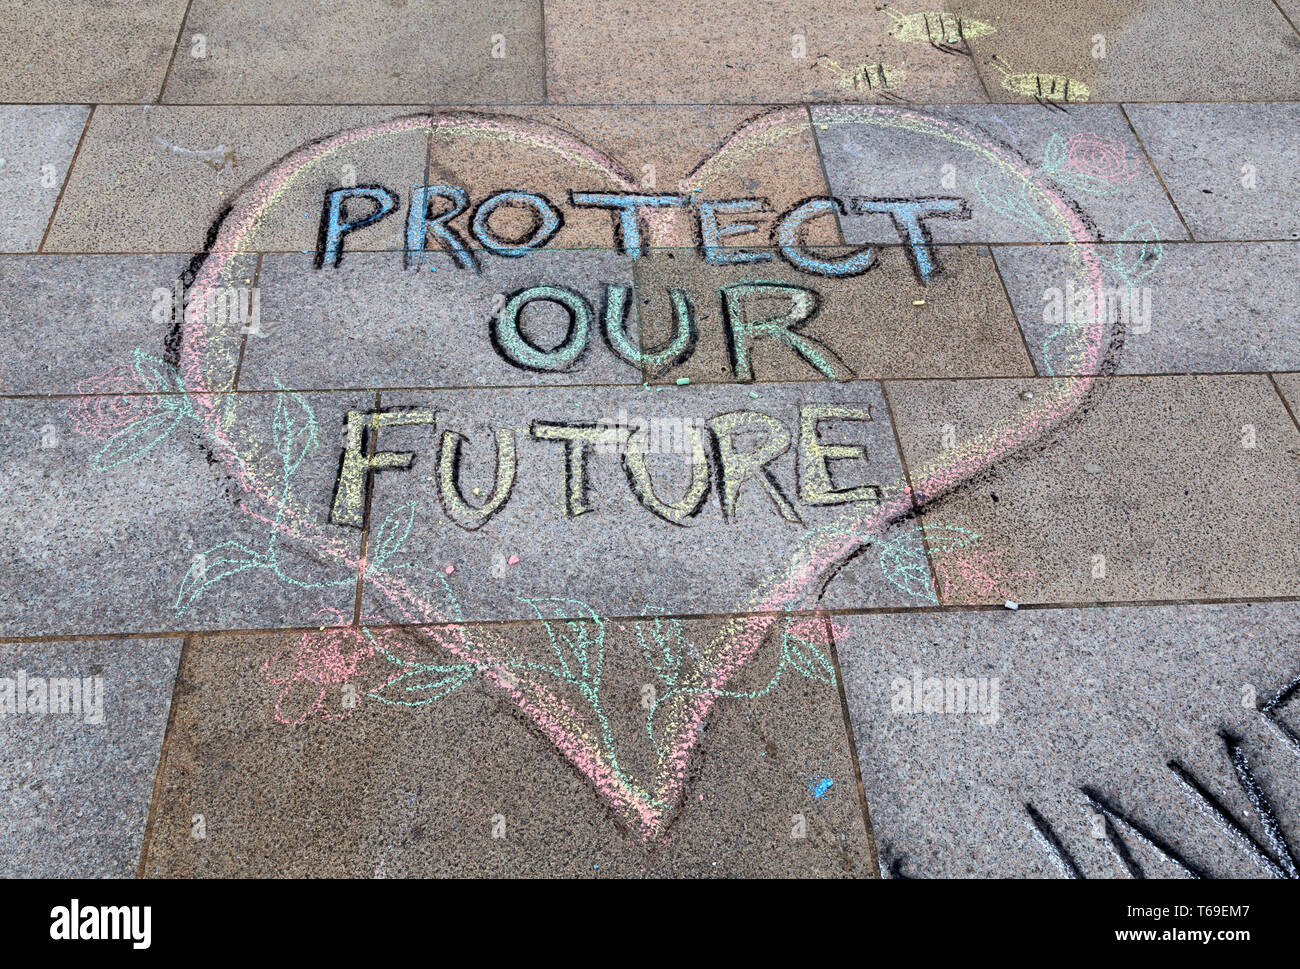 Chalk graffiti in the Town Square in Weston-super-Mare, UK as part of a protest organised by Extinction Rebellion Weston-super-Mare. Stock Photo